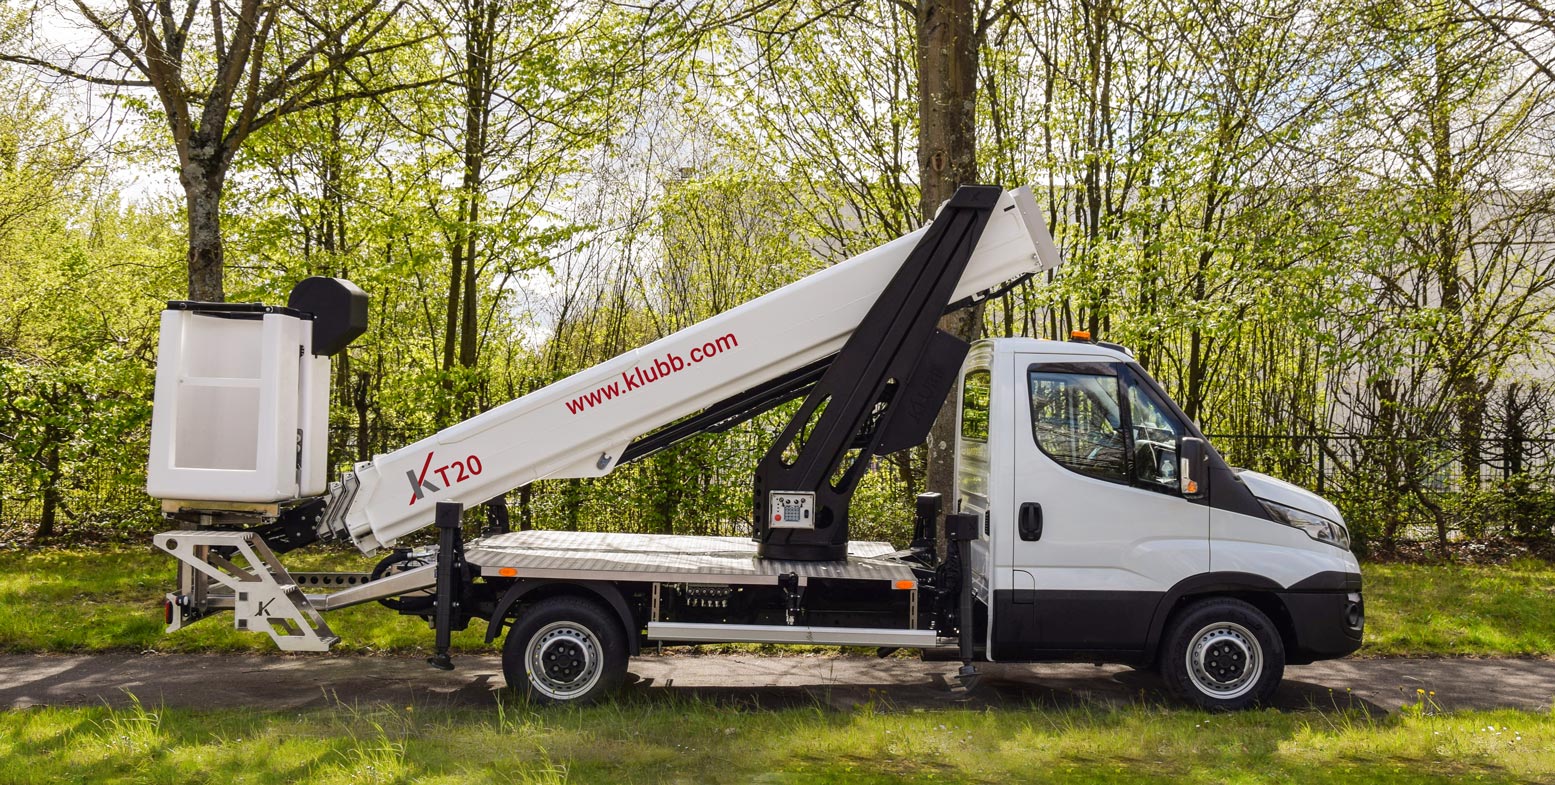 THE NEW KLUBB RANGE OF TELESCOPIC PLATFORMS ON CHASSIS IS OUT ! 